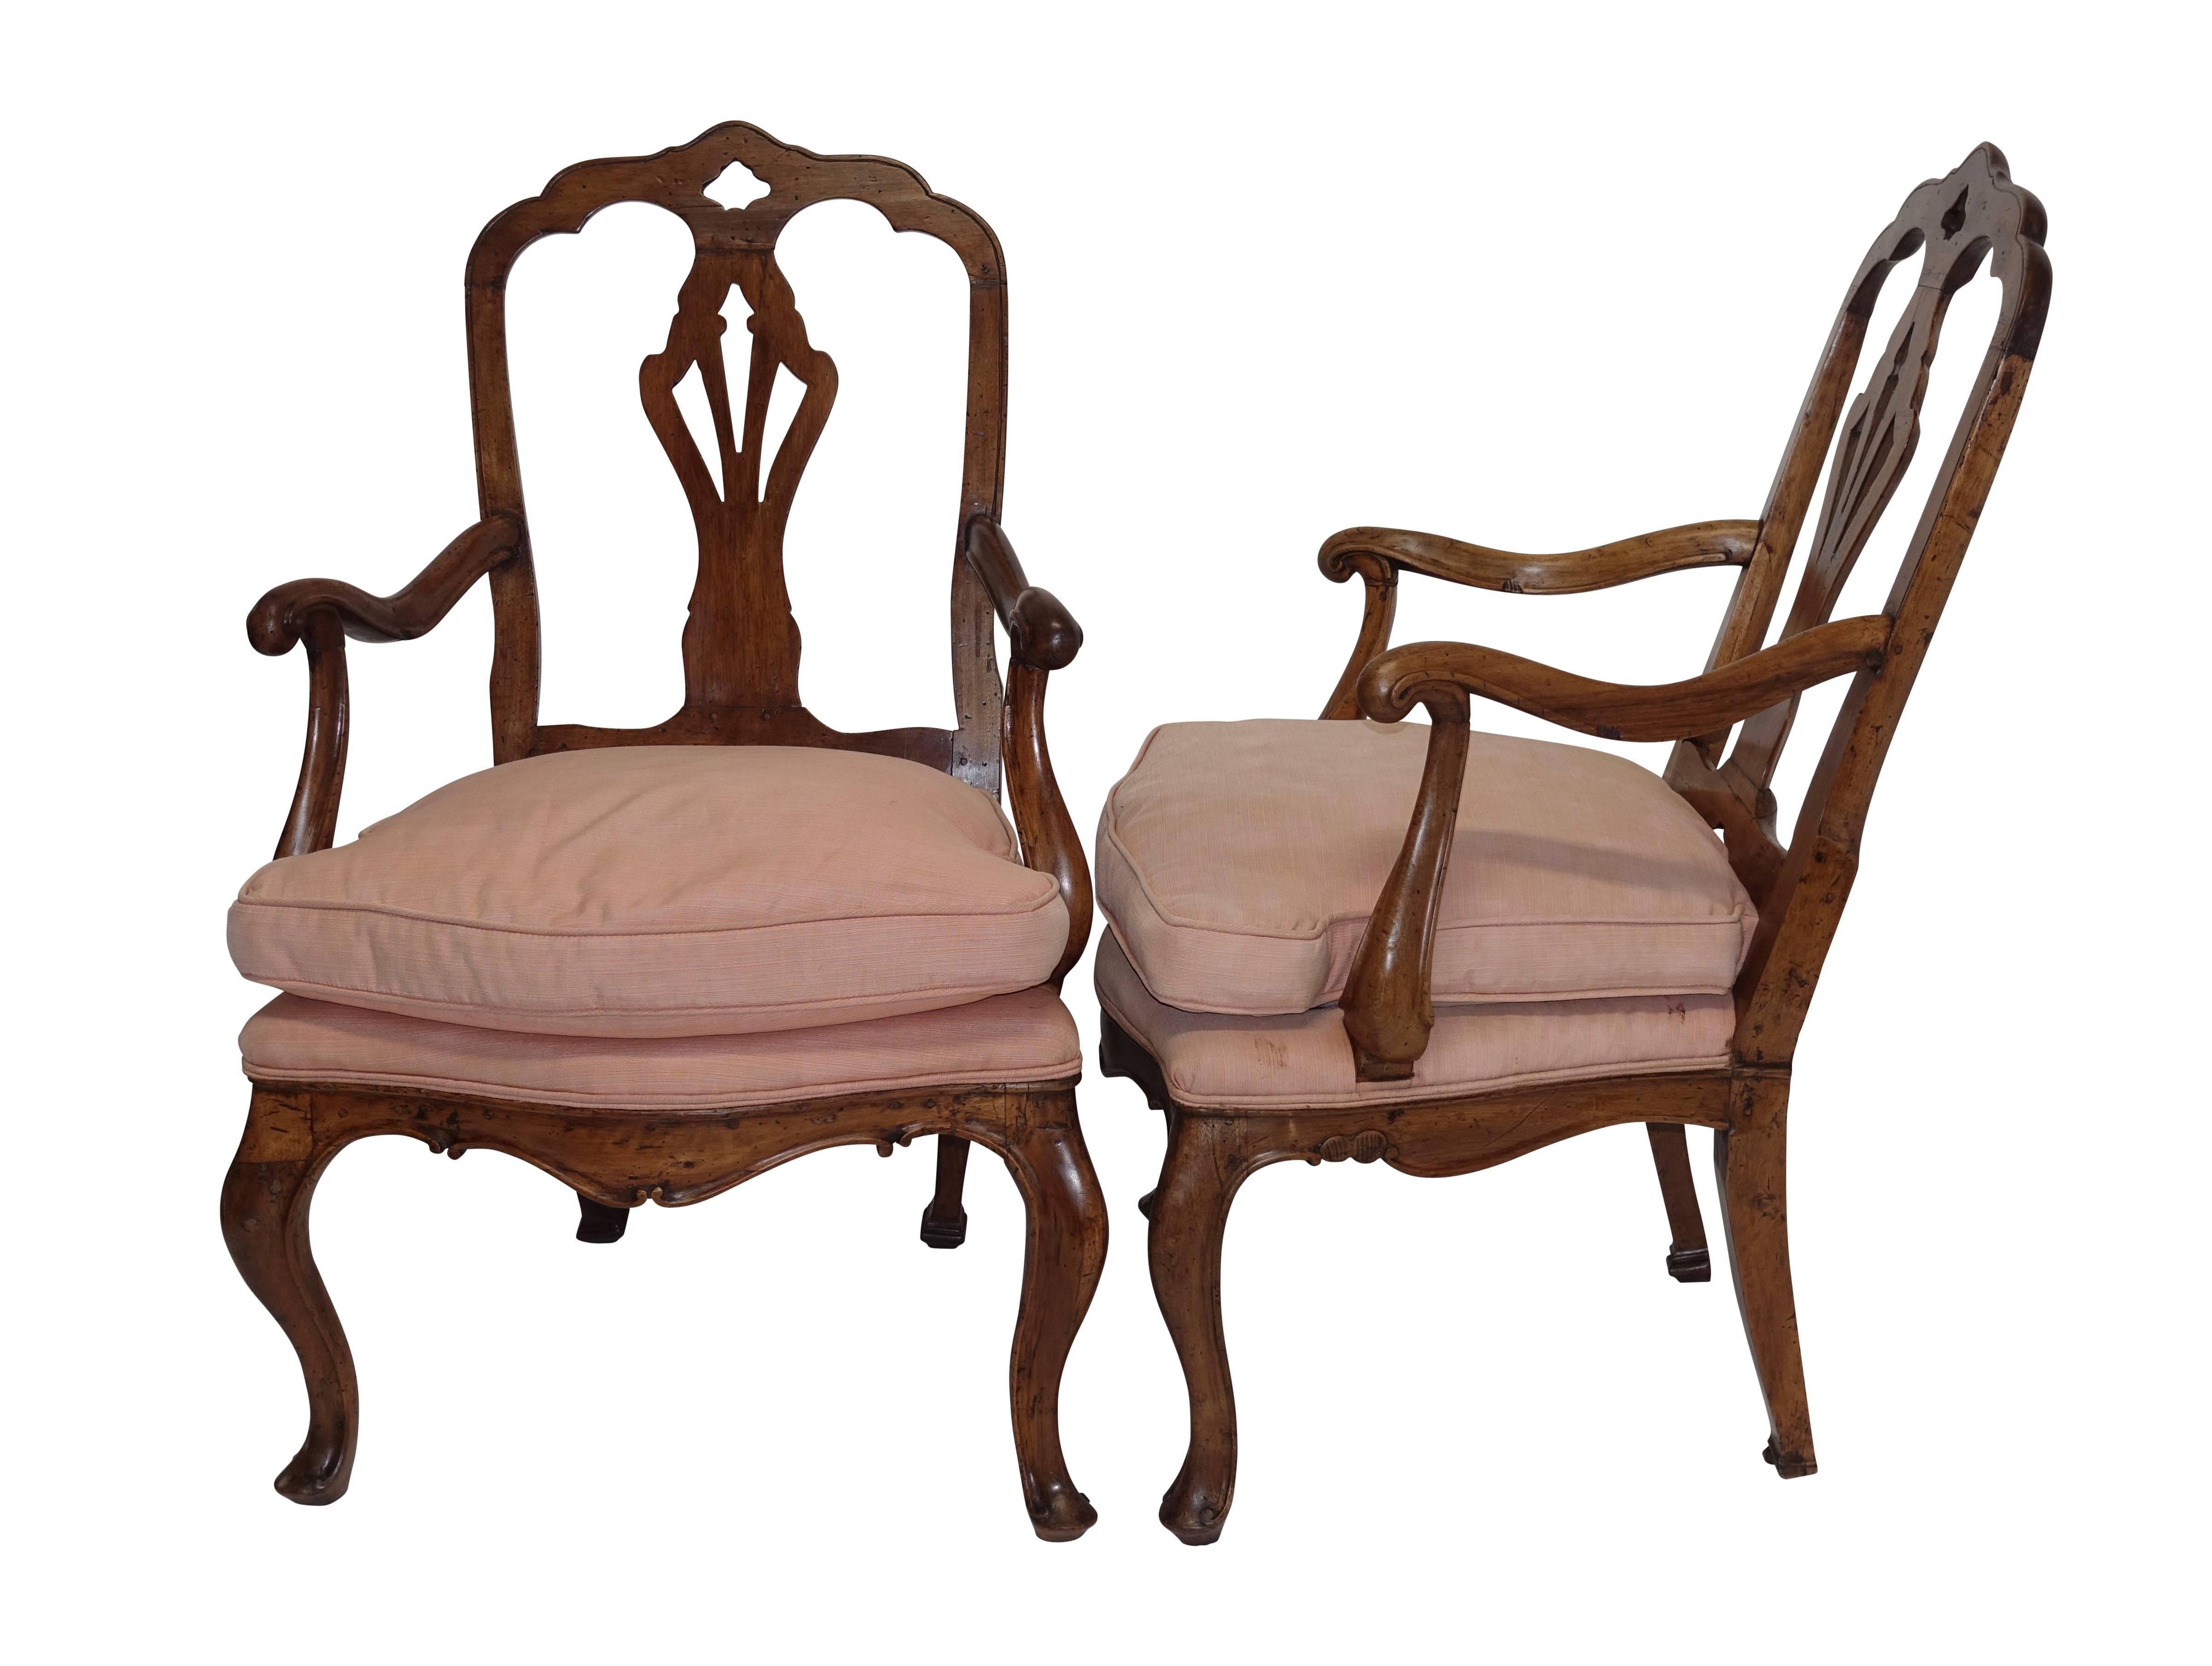 A handsome pair of walnut armchairs with shaped crest rail above carved back splat, having scrolling arms, and sitting on cabriole legs ending in a scroll footpad. The loose cushions are down filled, Italy, early 19th century.
Piedmontese, possibly